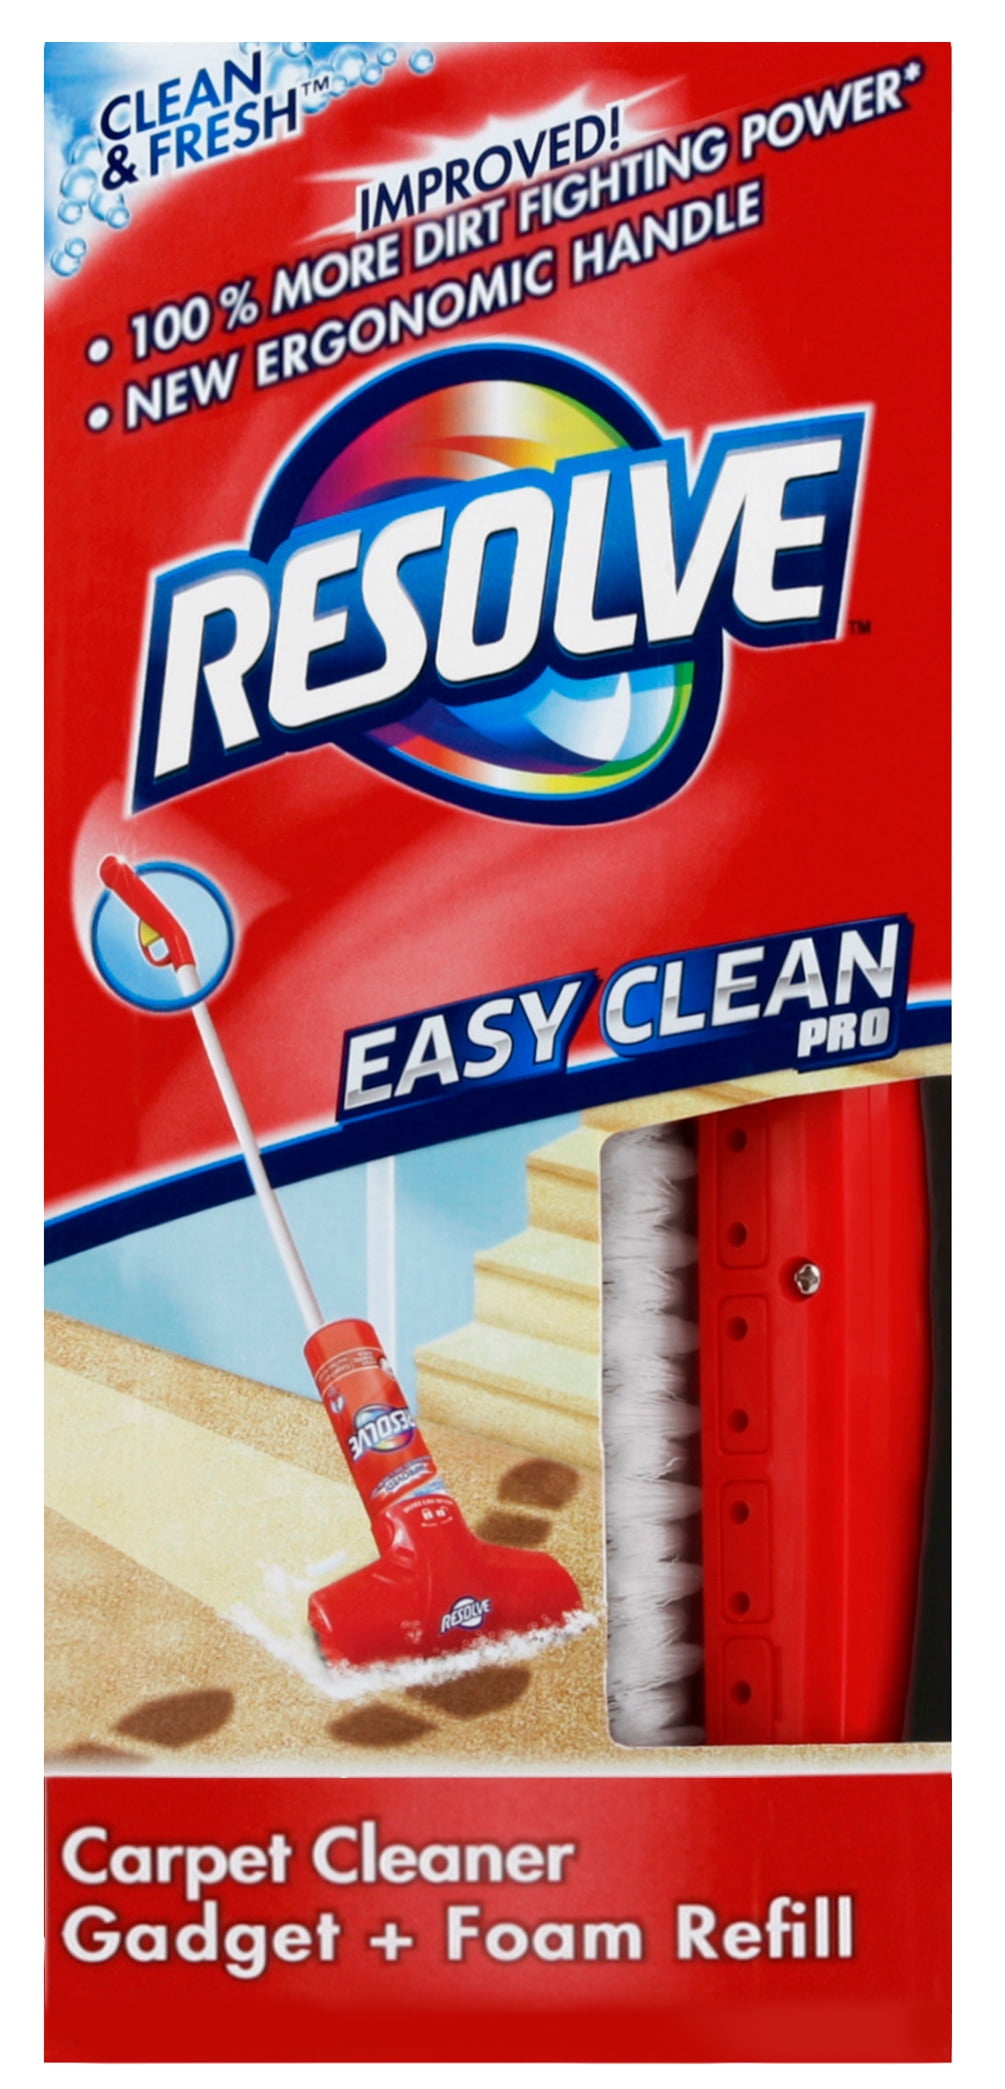 Resolve Pet Expert Easy Clean Carpet Cleaner Gadget Foam Spray Refill, 2  Piece Set, Carpet Cleaner, Pet Stain And Odor Remover, Carpet Cleaner